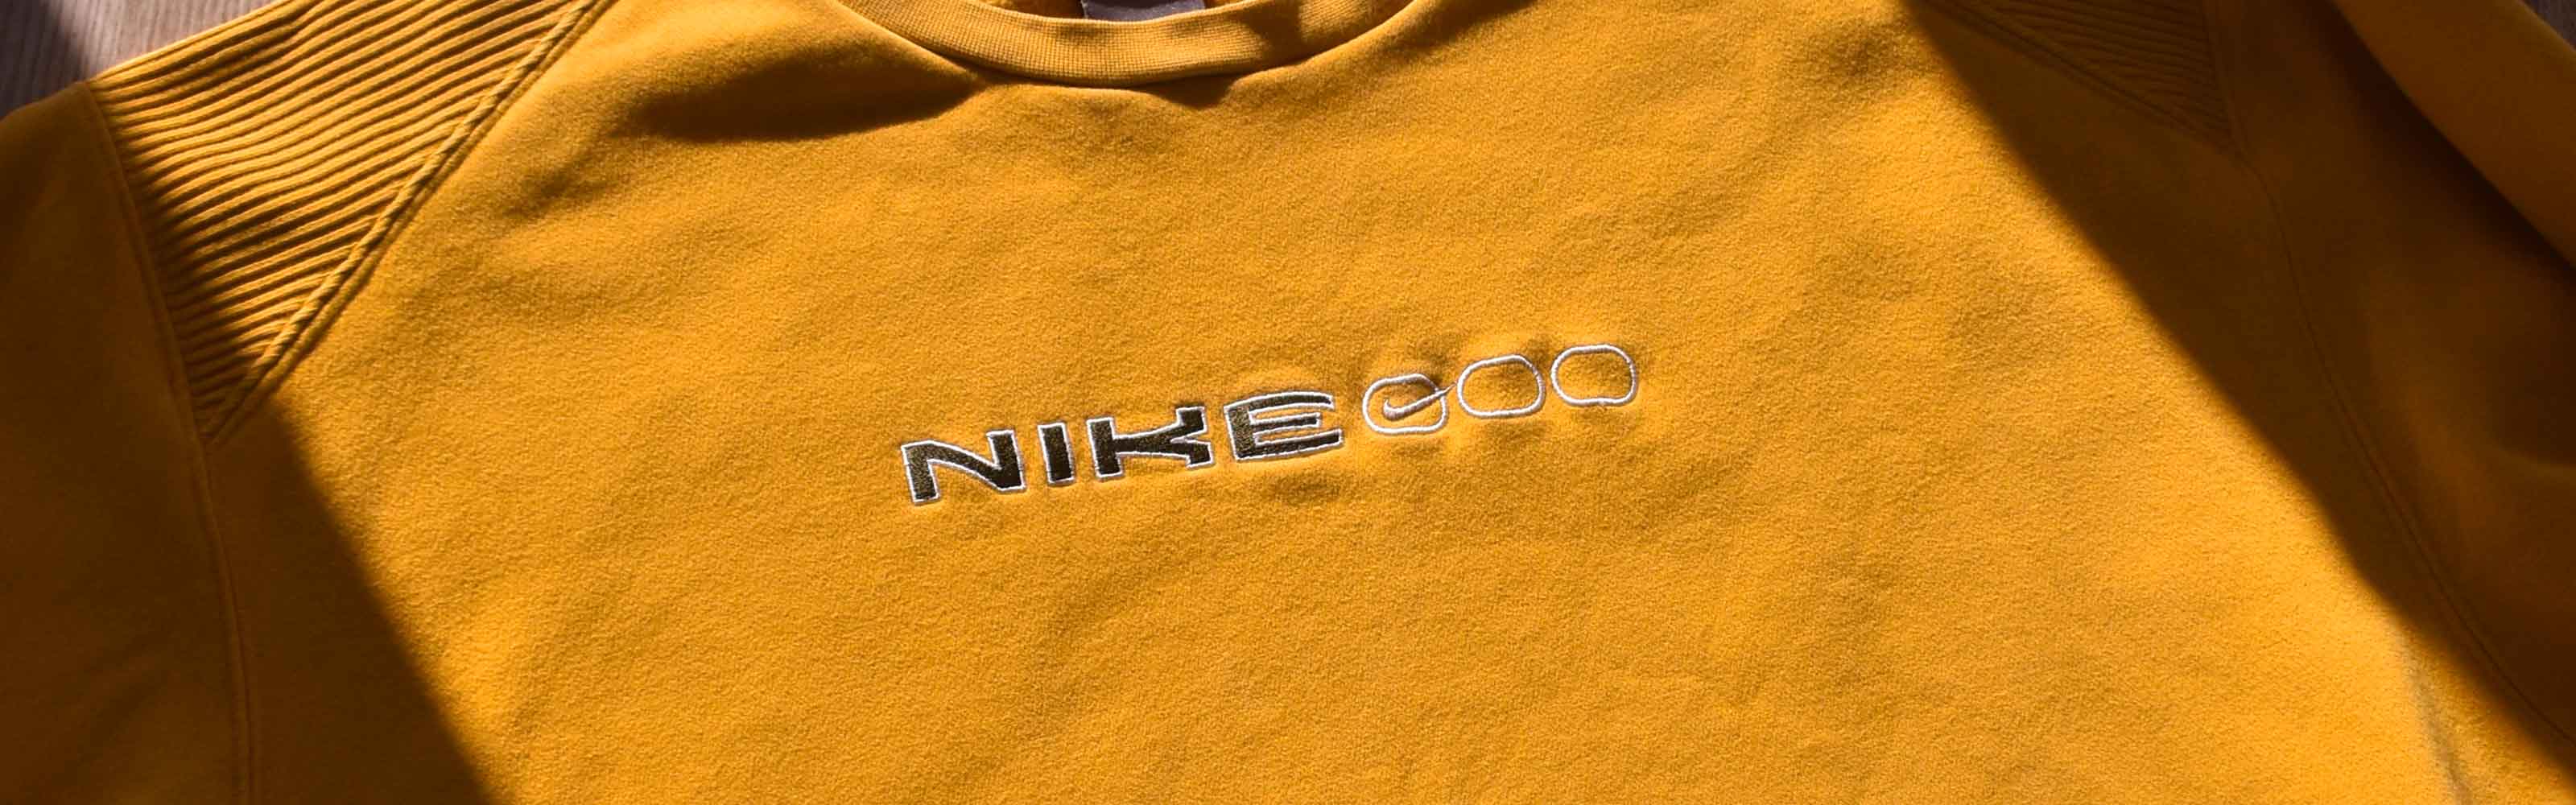 Yellow Nike sweatshirt with intricate embroidery, casually placed on the ground